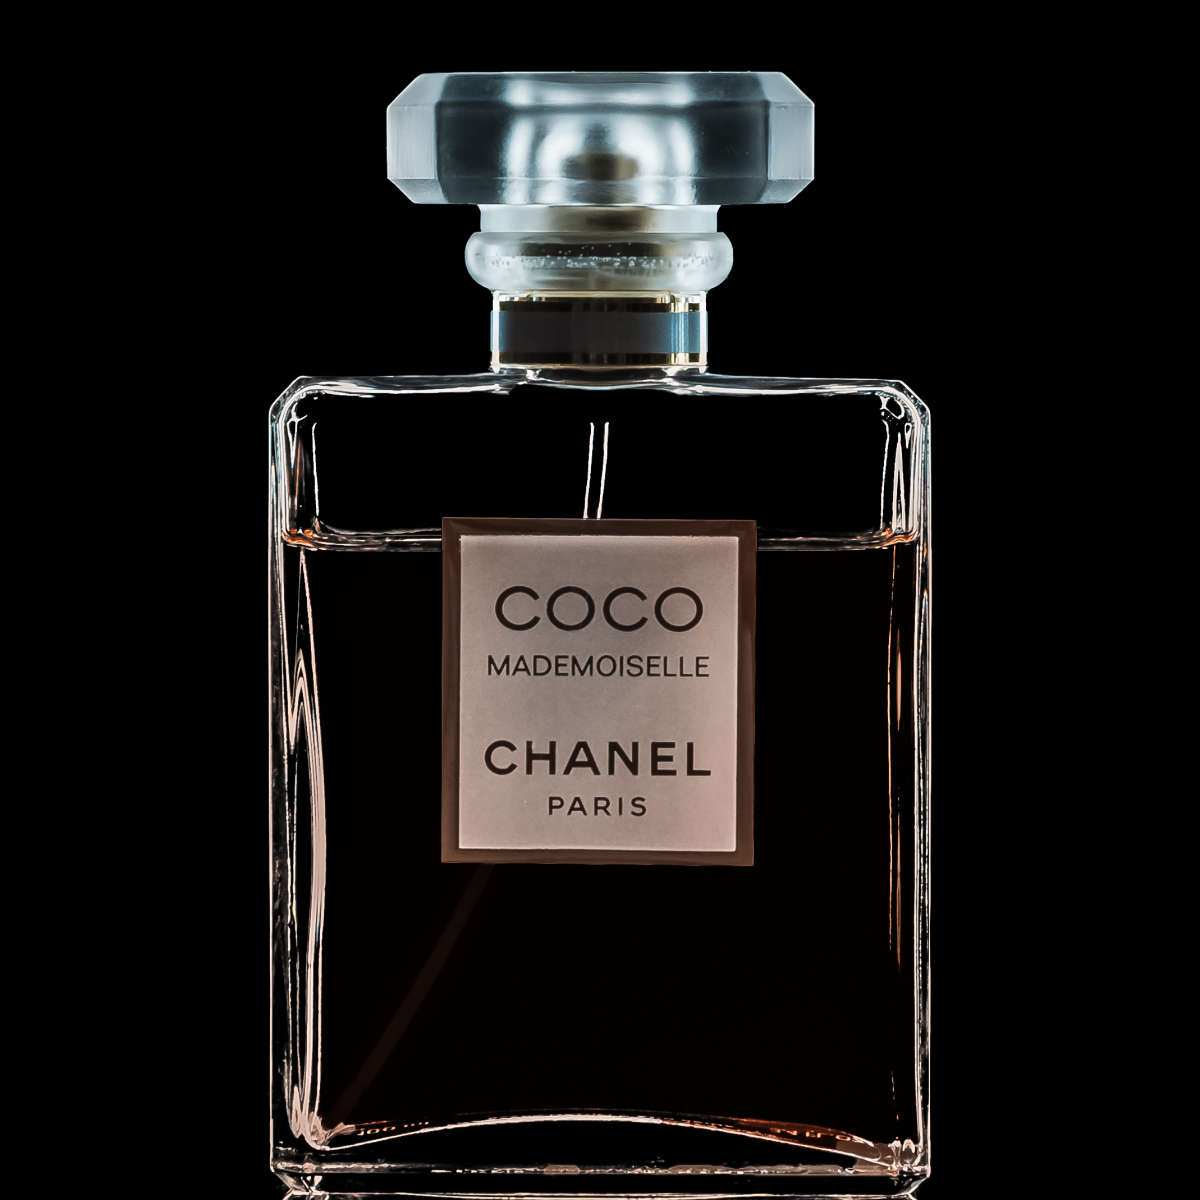 A VibesBased Breakdown of Every Chanel Cologne for Men  GQ